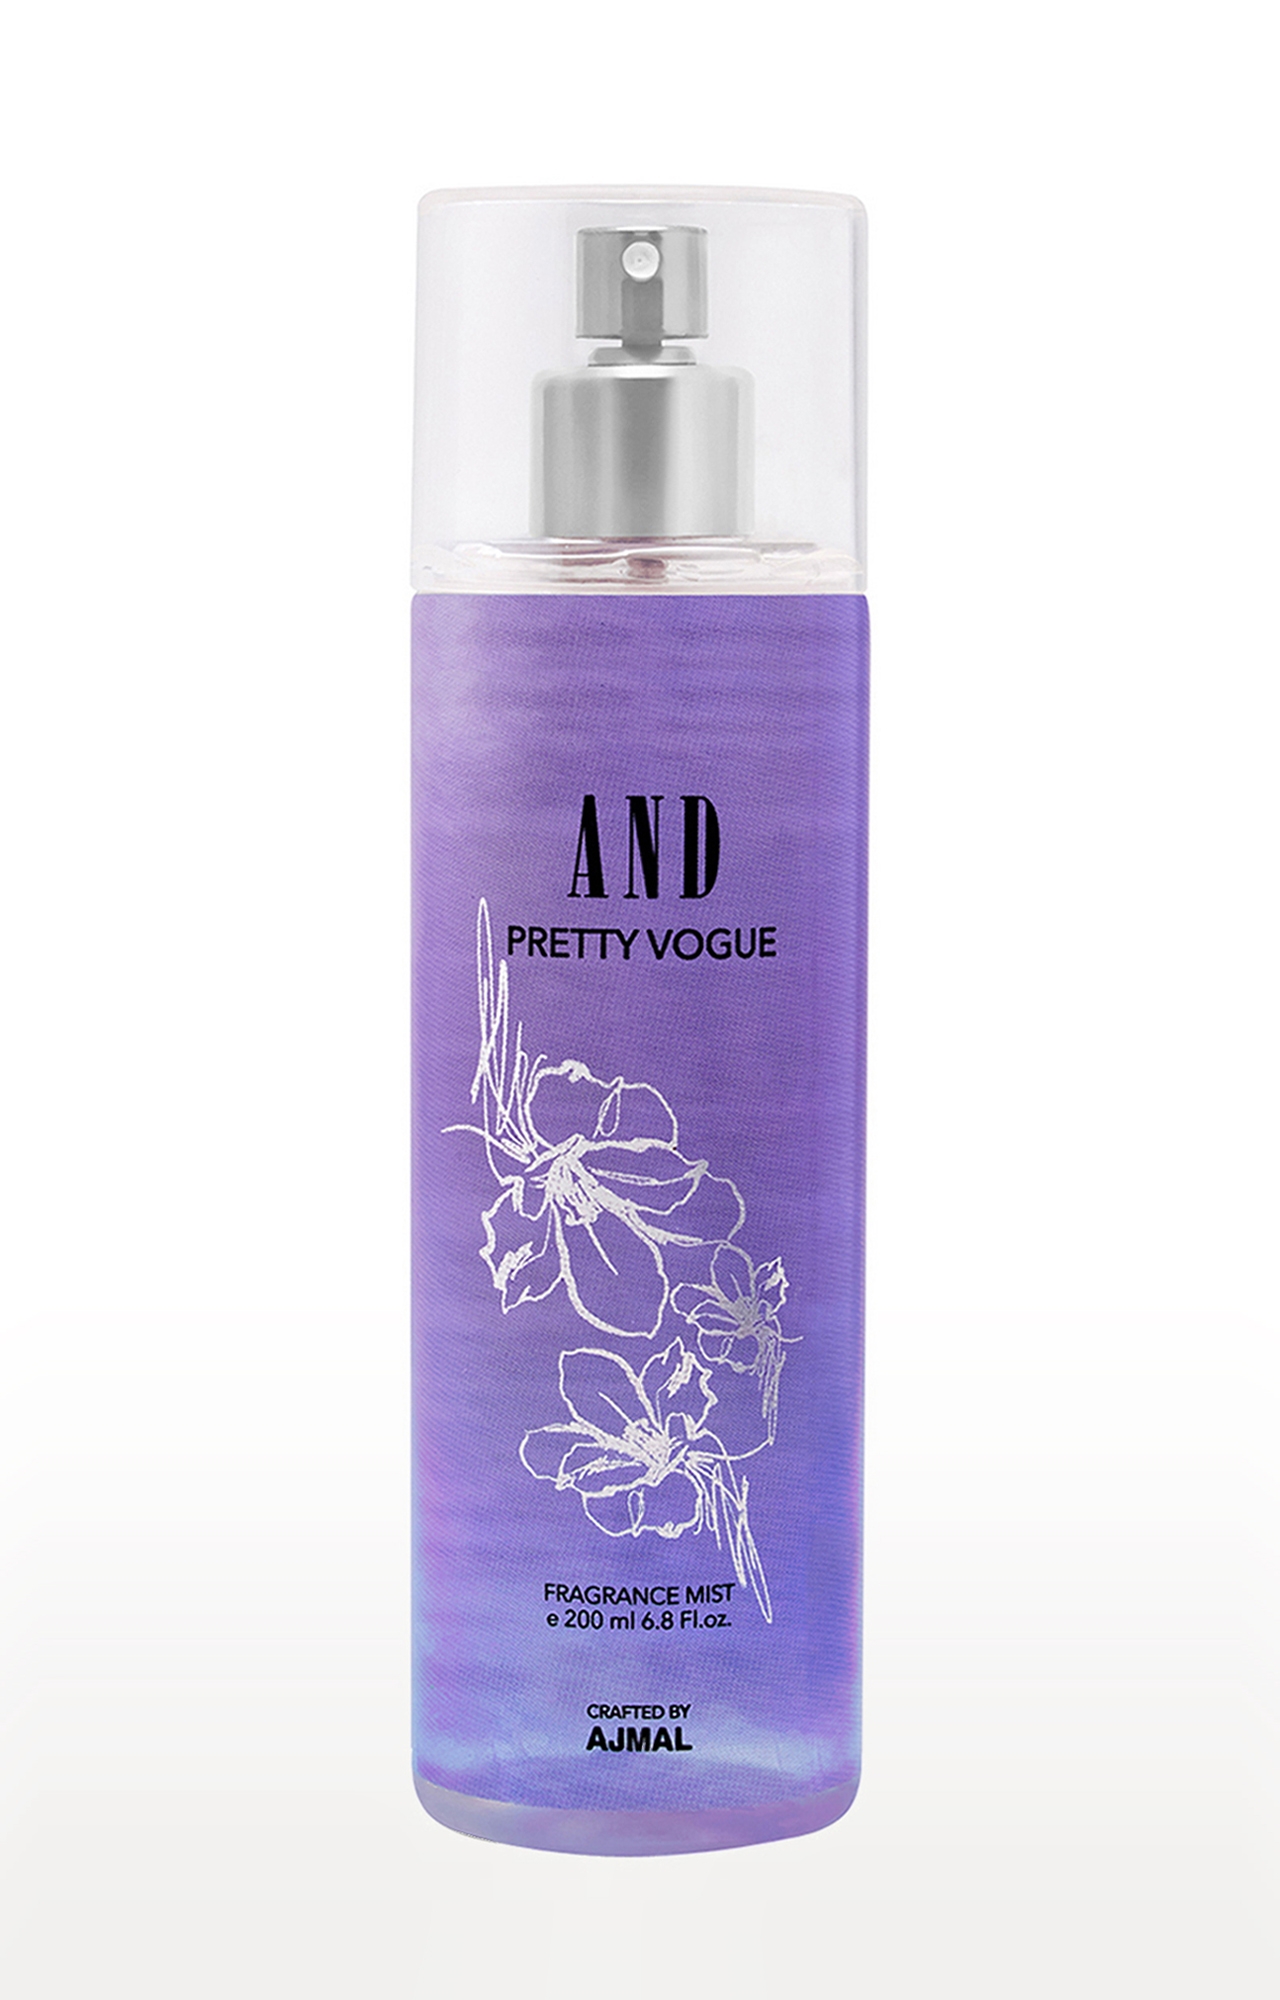 AND Pretty Vogue Body Mist Perfume 200ML Long Lasting Scent Spray Gift For Women Crafted by Ajmal